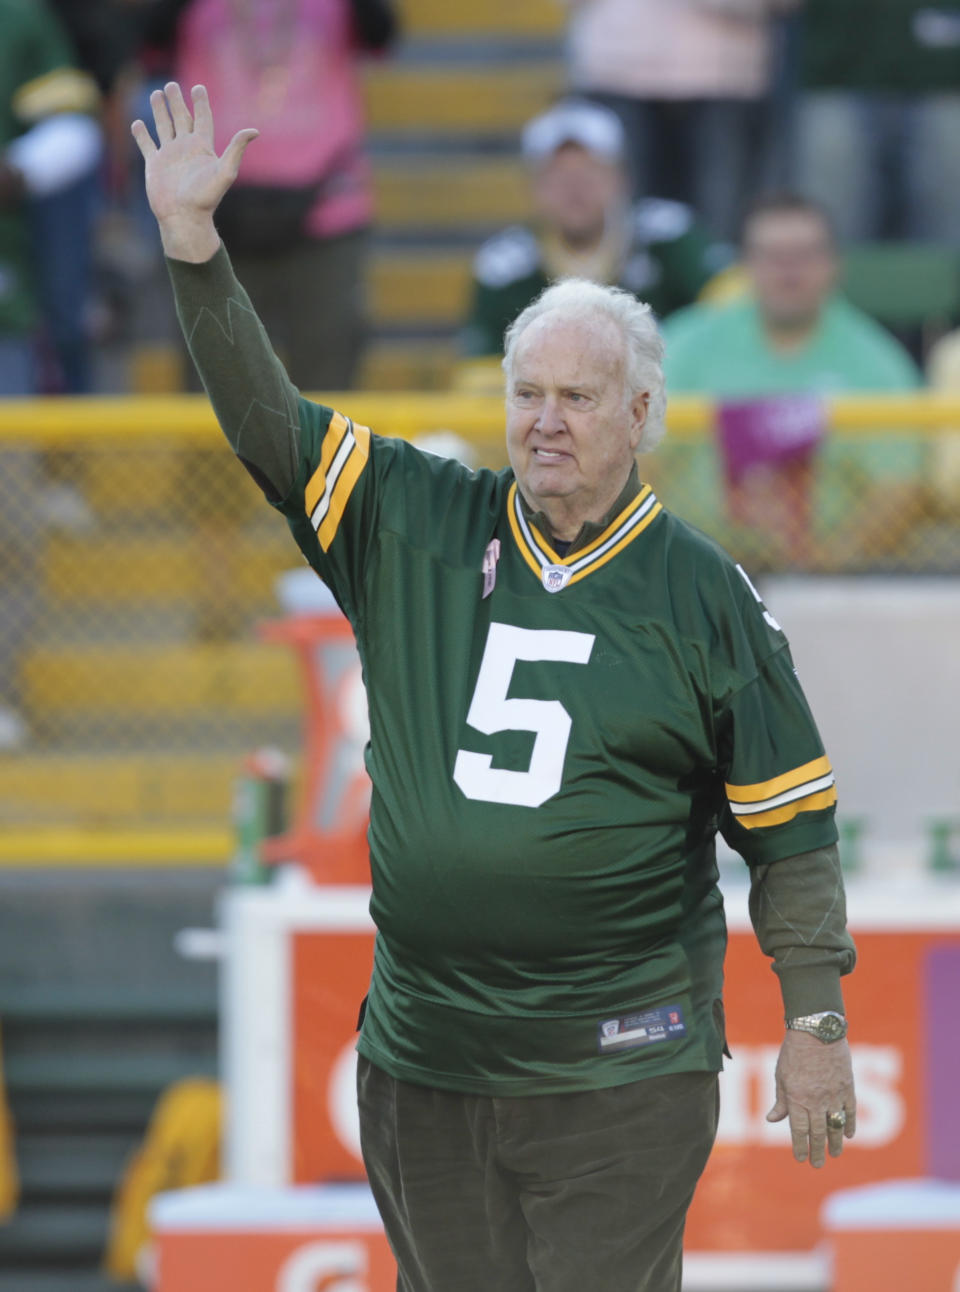 FILE - In this Oct. 2, 2011 file photo, former Green Bay Packer Paul Hornung waves to the crowd during an NFL football game in Green Bay, Wis. Hornung, the dazzling “Golden Boy” of the Green Bay Packers whose singular ability to generate points as a runner, receiver, quarterback, and kicker helped turn them into an NFL dynasty, has died, Friday, Nov. 13, 2020. He was 84. (AP Photo/Mike Roemer, File)